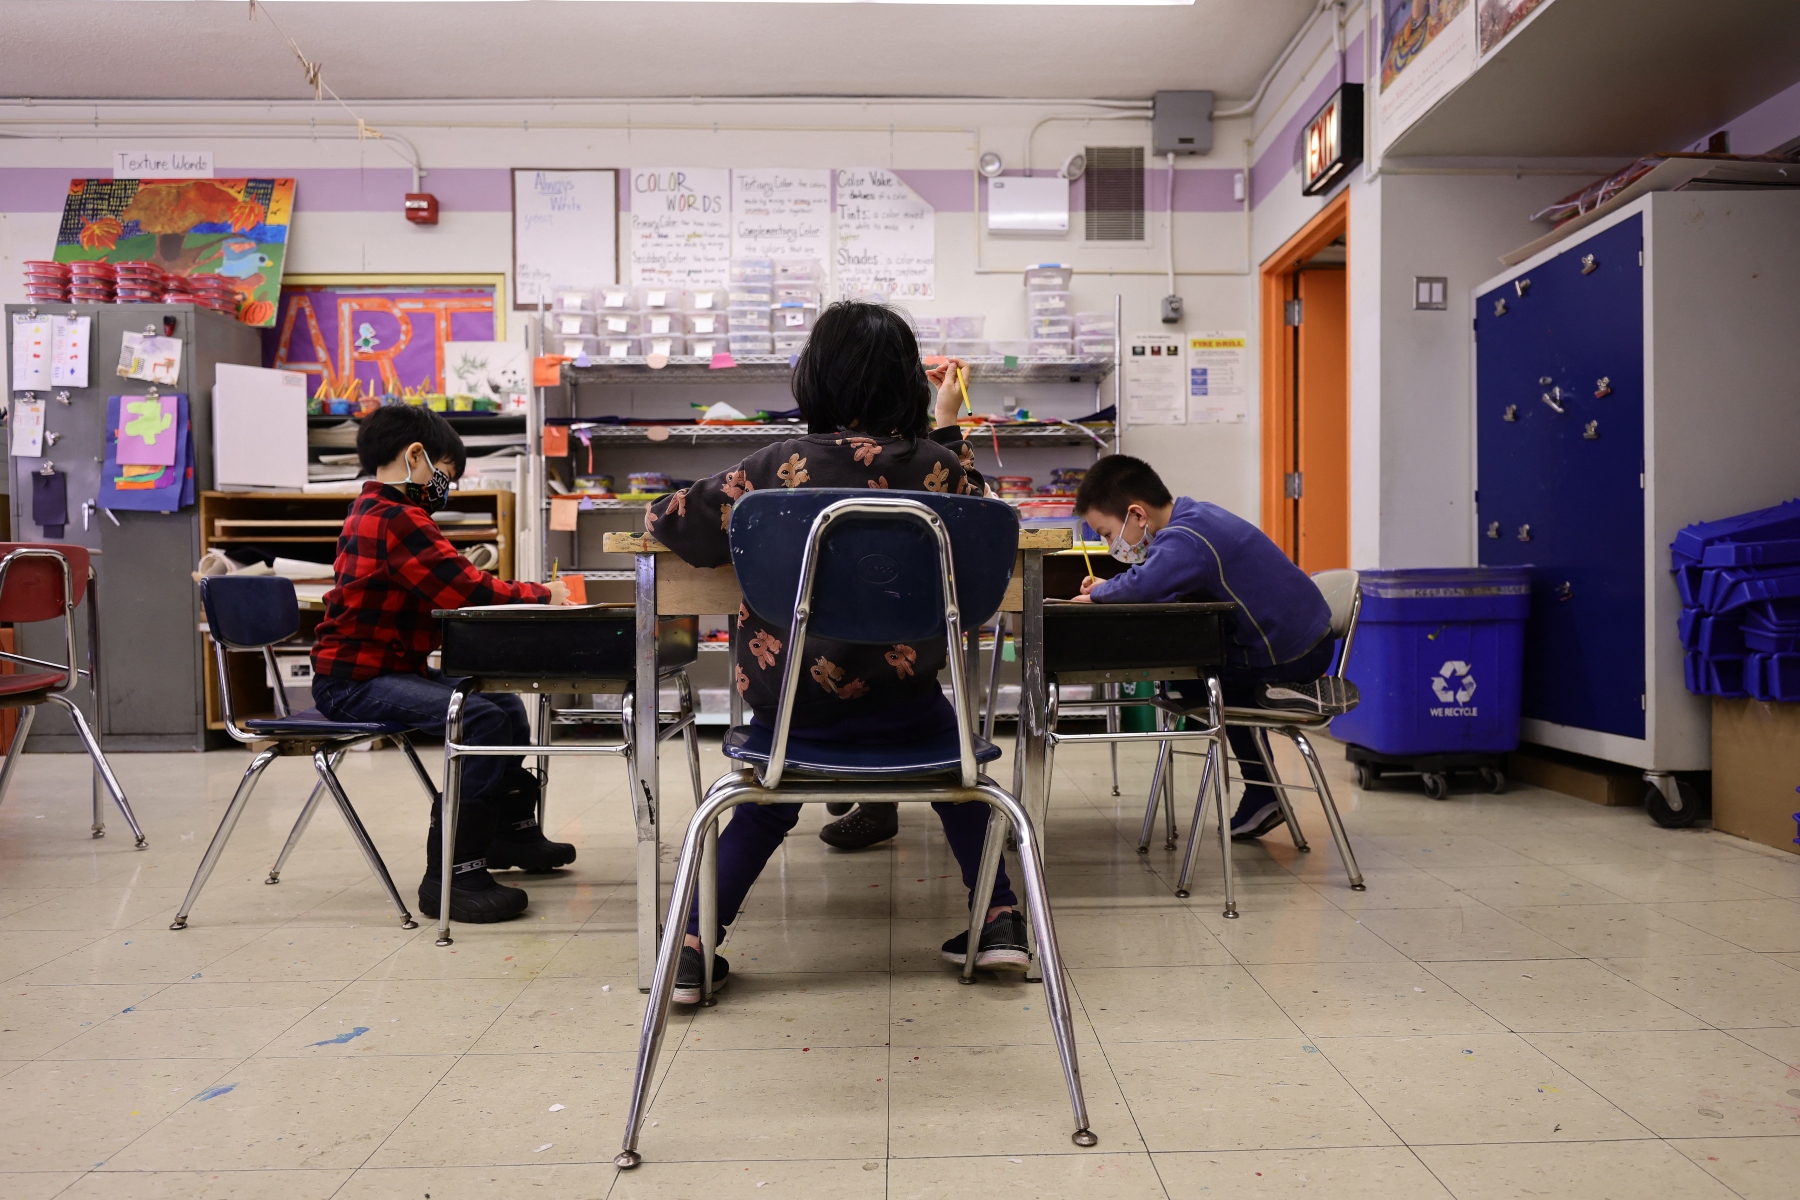 Students are often segregated within the same schools, not just by being sent to different ones